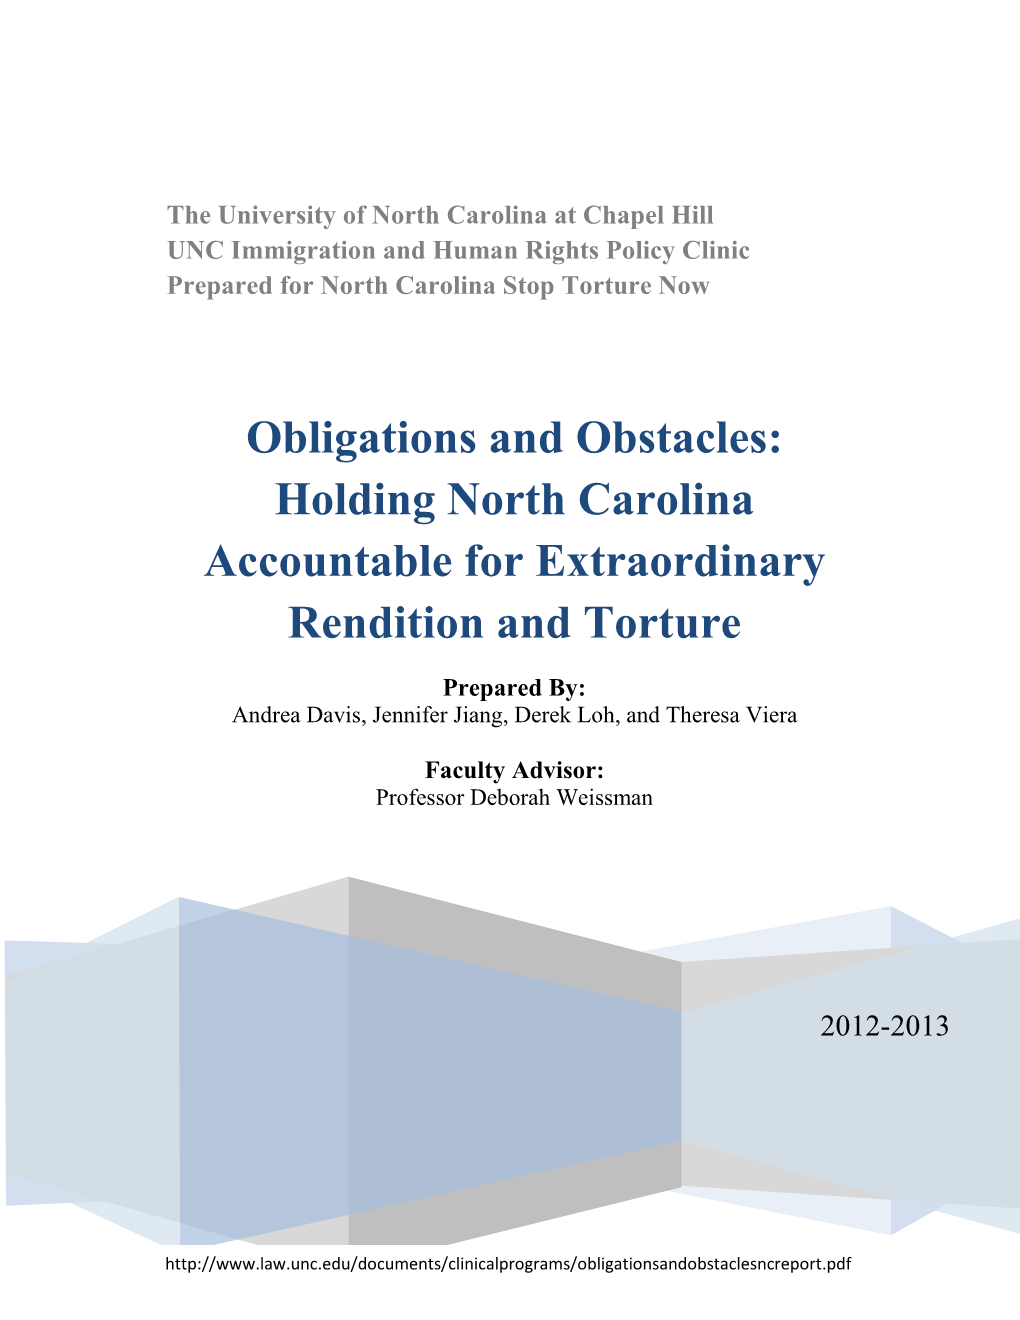 Obligations and Obstacles: Holding North Carolina Accountable for Extraordinary Rendition and Torture